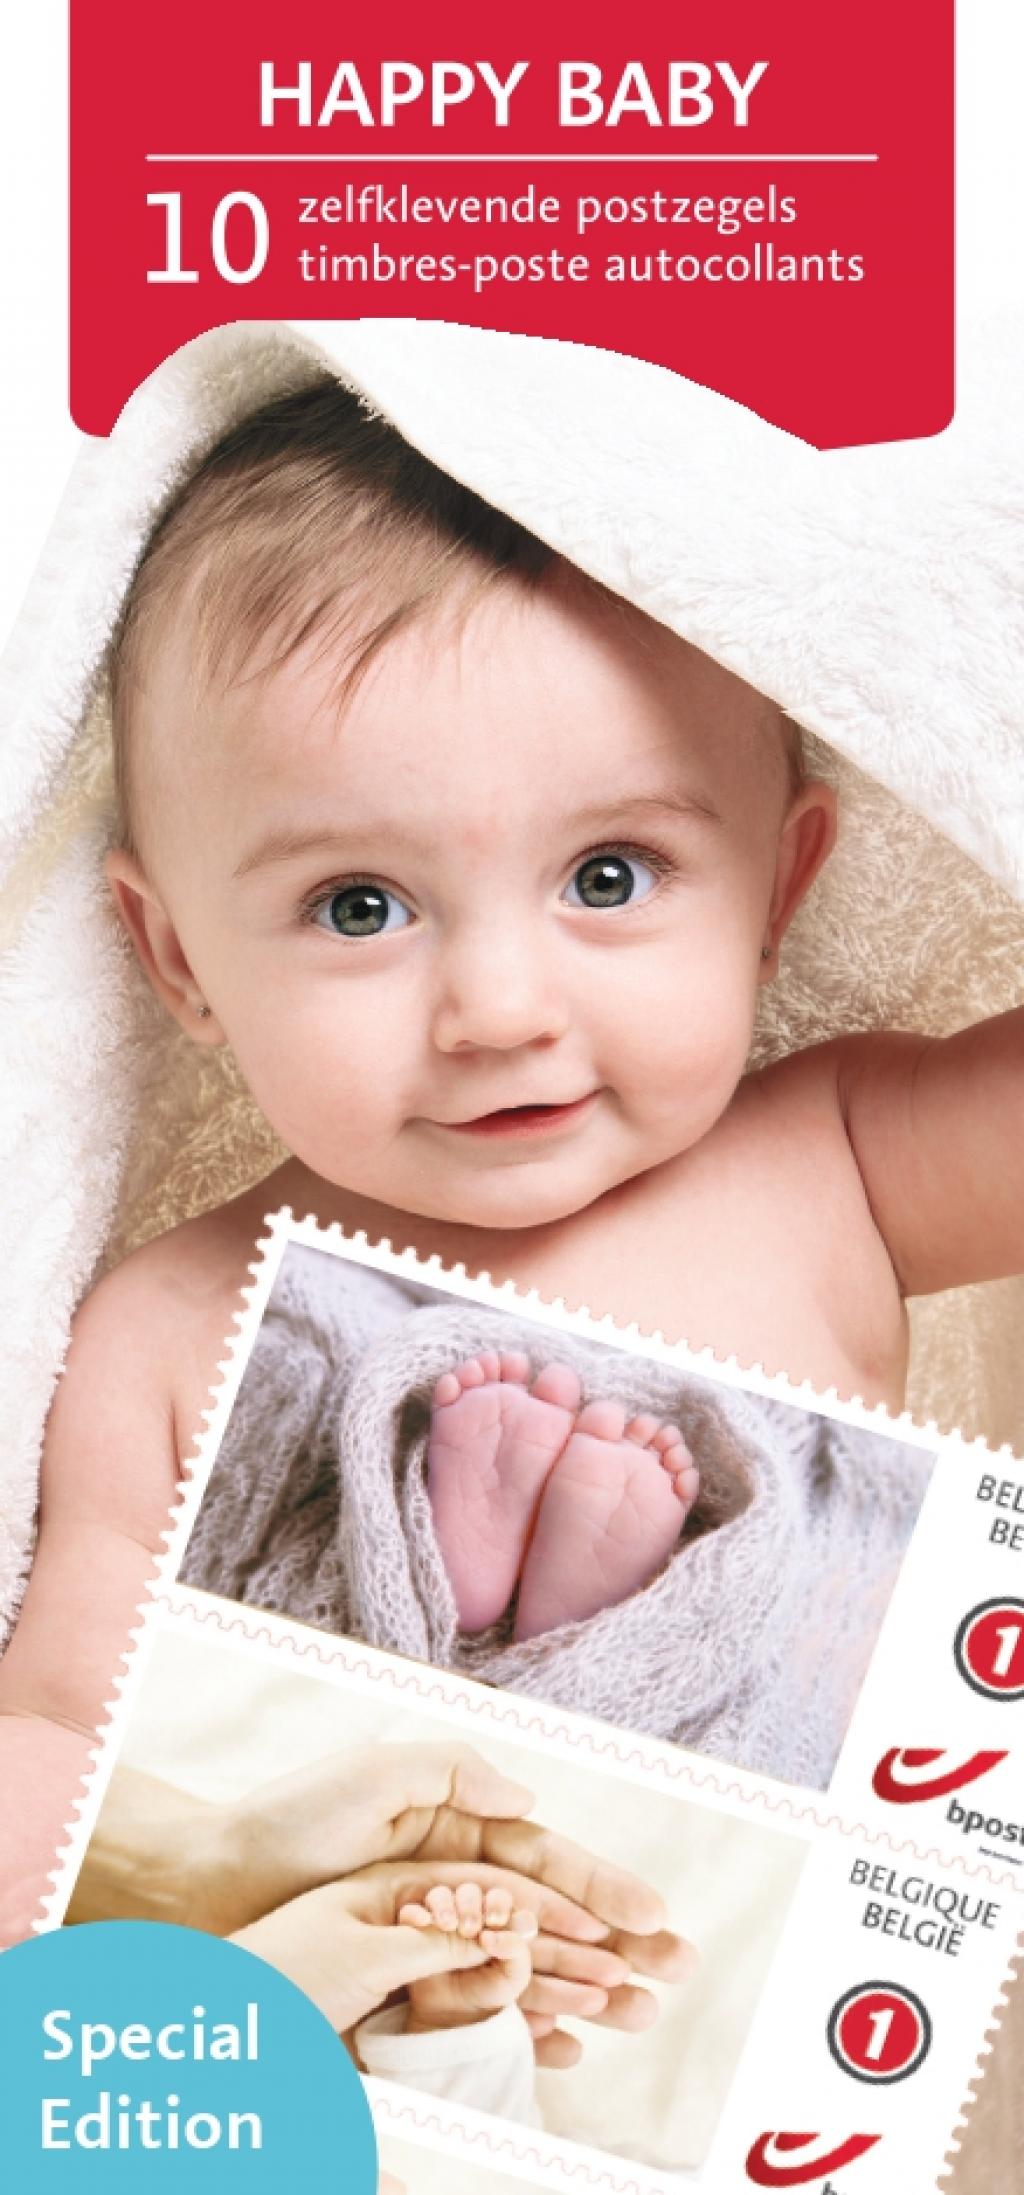 alt for - TS-happybaby2-STAMPS.jpg